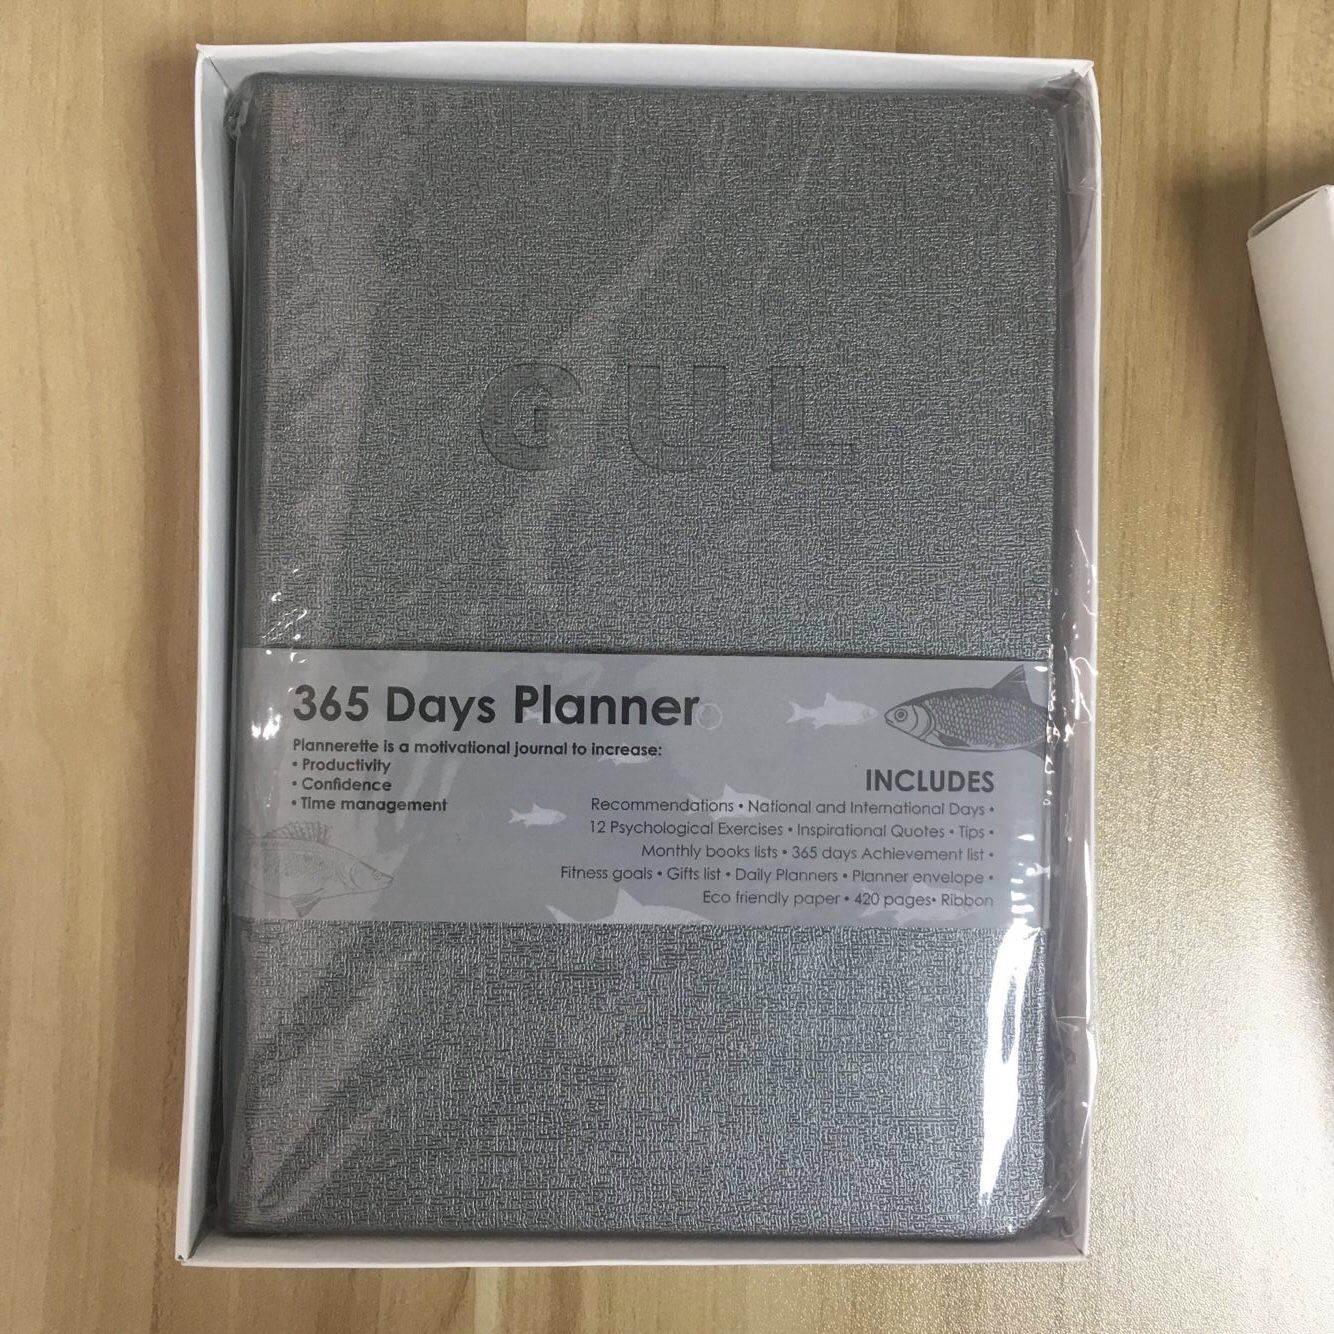 Daily planner PRE-ORDERs Limited Edition